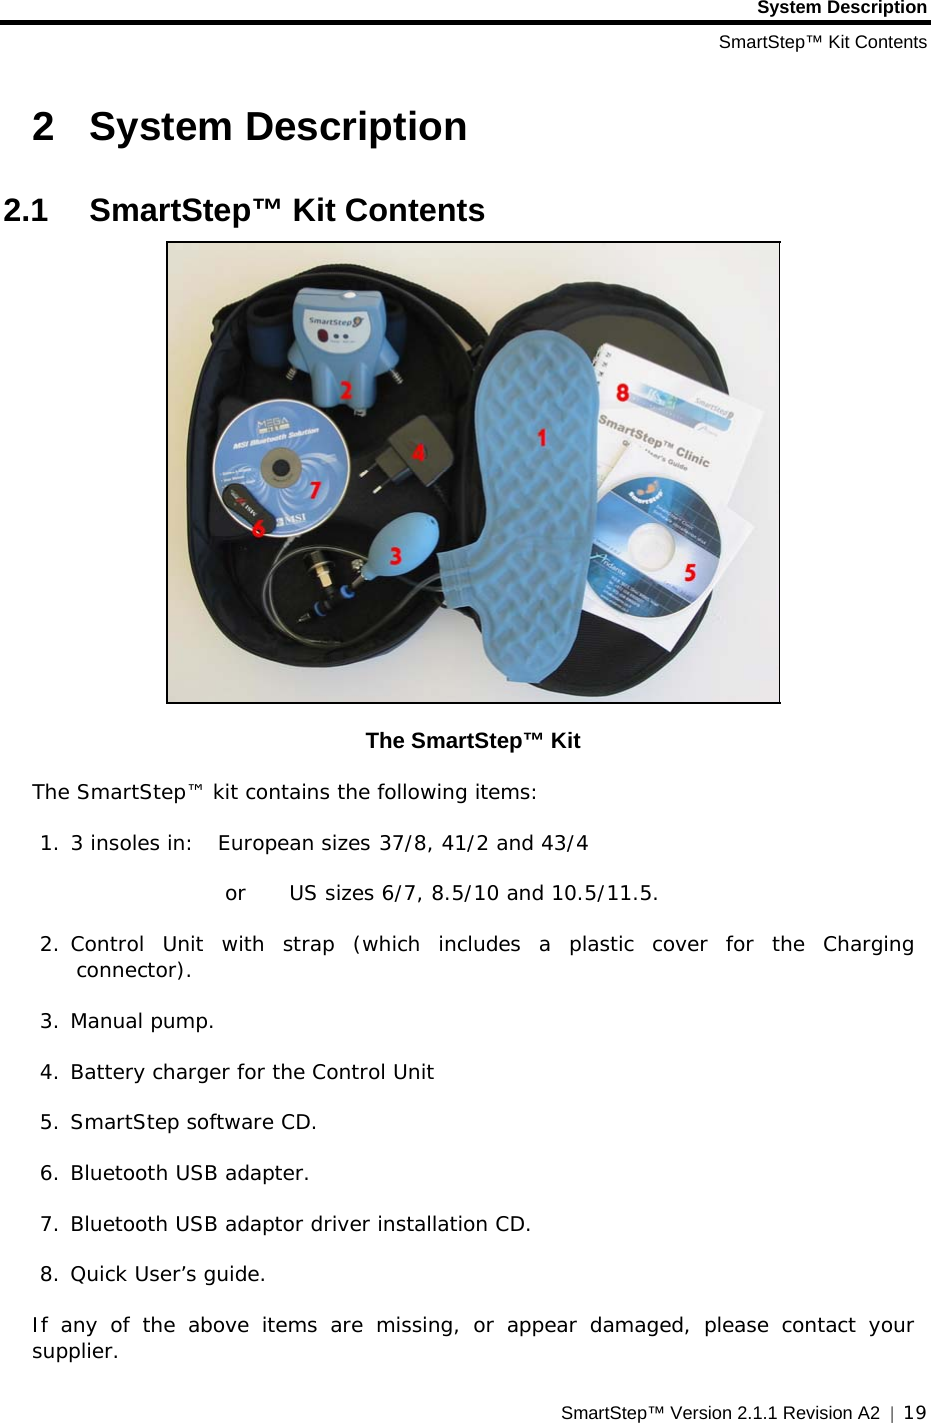 System Description SmartStep™ Kit Contents SmartStep™ Version 2.1.1 Revision A2  |  19  2  System Description  2.1 SmartStep™ Kit Contents  The SmartStep™ Kit The SmartStep™ kit contains the following items: 1. 3 insoles in:   European sizes 37/8, 41/2 and 43/4      or US sizes 6/7, 8.5/10 and 10.5/11.5.  2. Control Unit with strap (which includes a plastic cover for the Charging connector).  3. Manual pump. 4. Battery charger for the Control Unit  5. SmartStep software CD. 6. Bluetooth USB adapter.  7. Bluetooth USB adaptor driver installation CD.  8. Quick User’s guide. If any of the above items are missing, or appear damaged, please contact your supplier. 